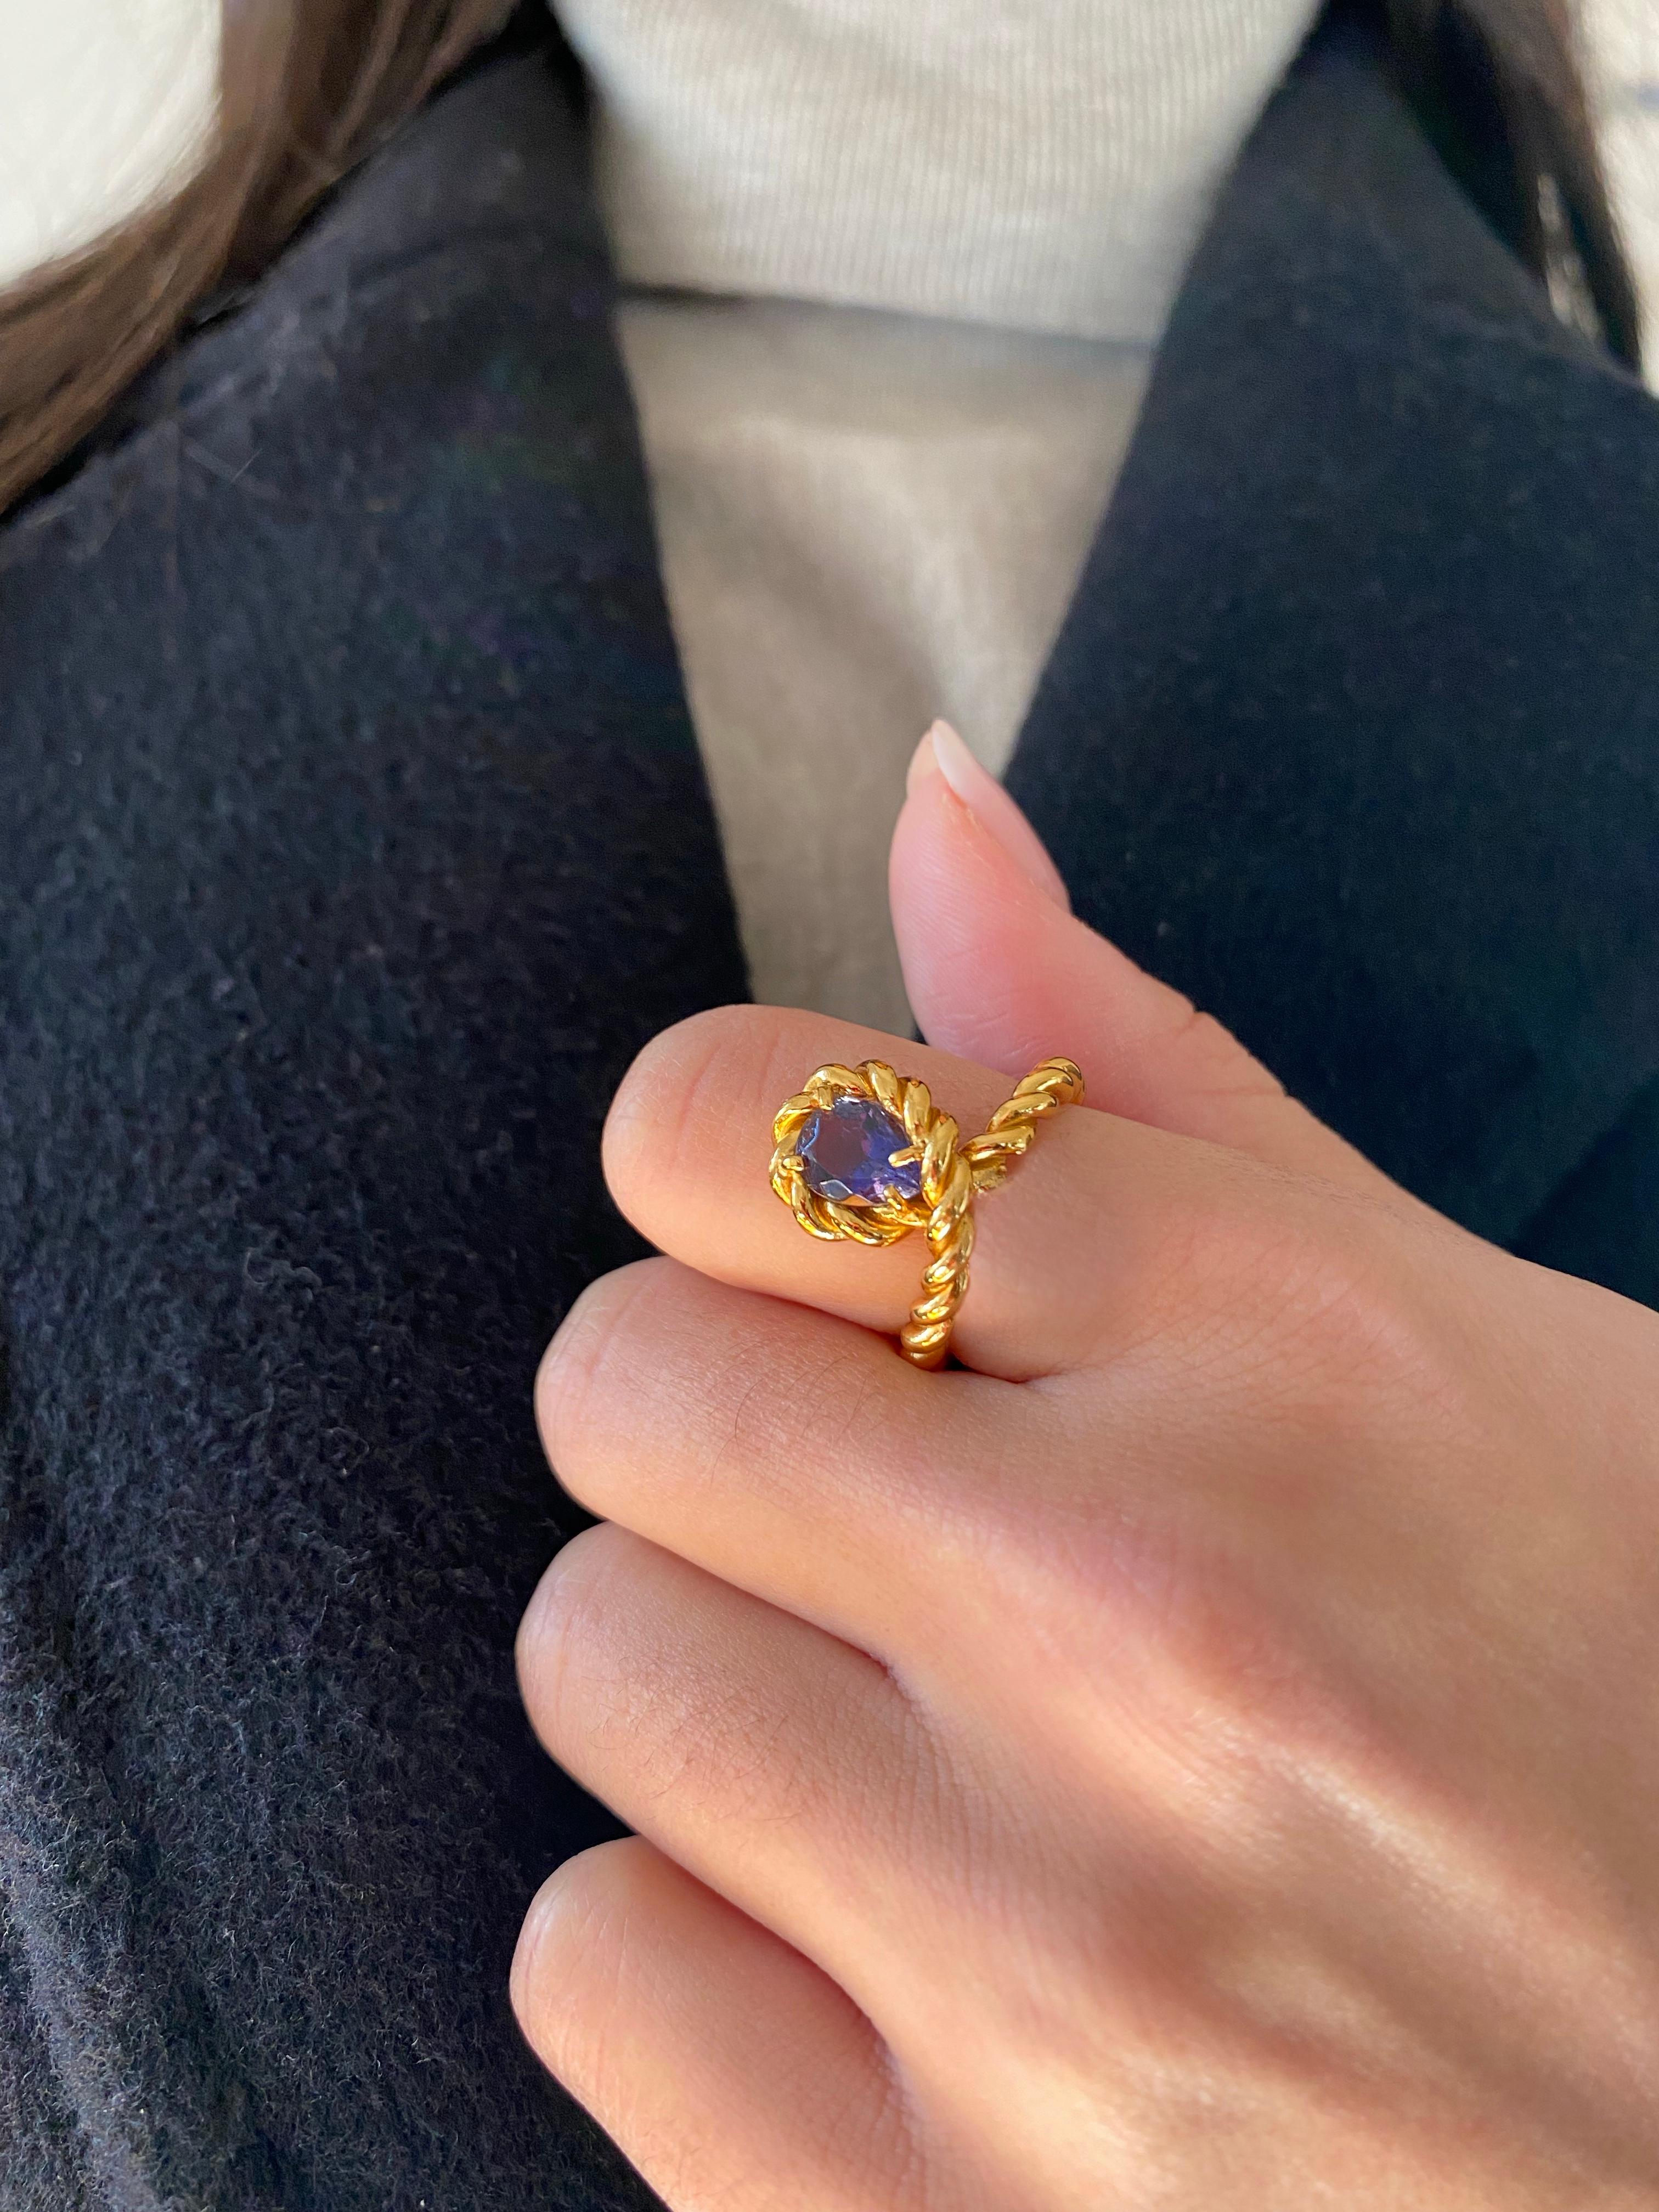 Rossella Ugolini Design Collection a beautiful Iolite design ring handcrafted with a twisted rope in 18 karats Yellow Gold  that makes a single line around the finger and surrounds the deep blue pear cut Iolite blue stone . Elegant and simple Design